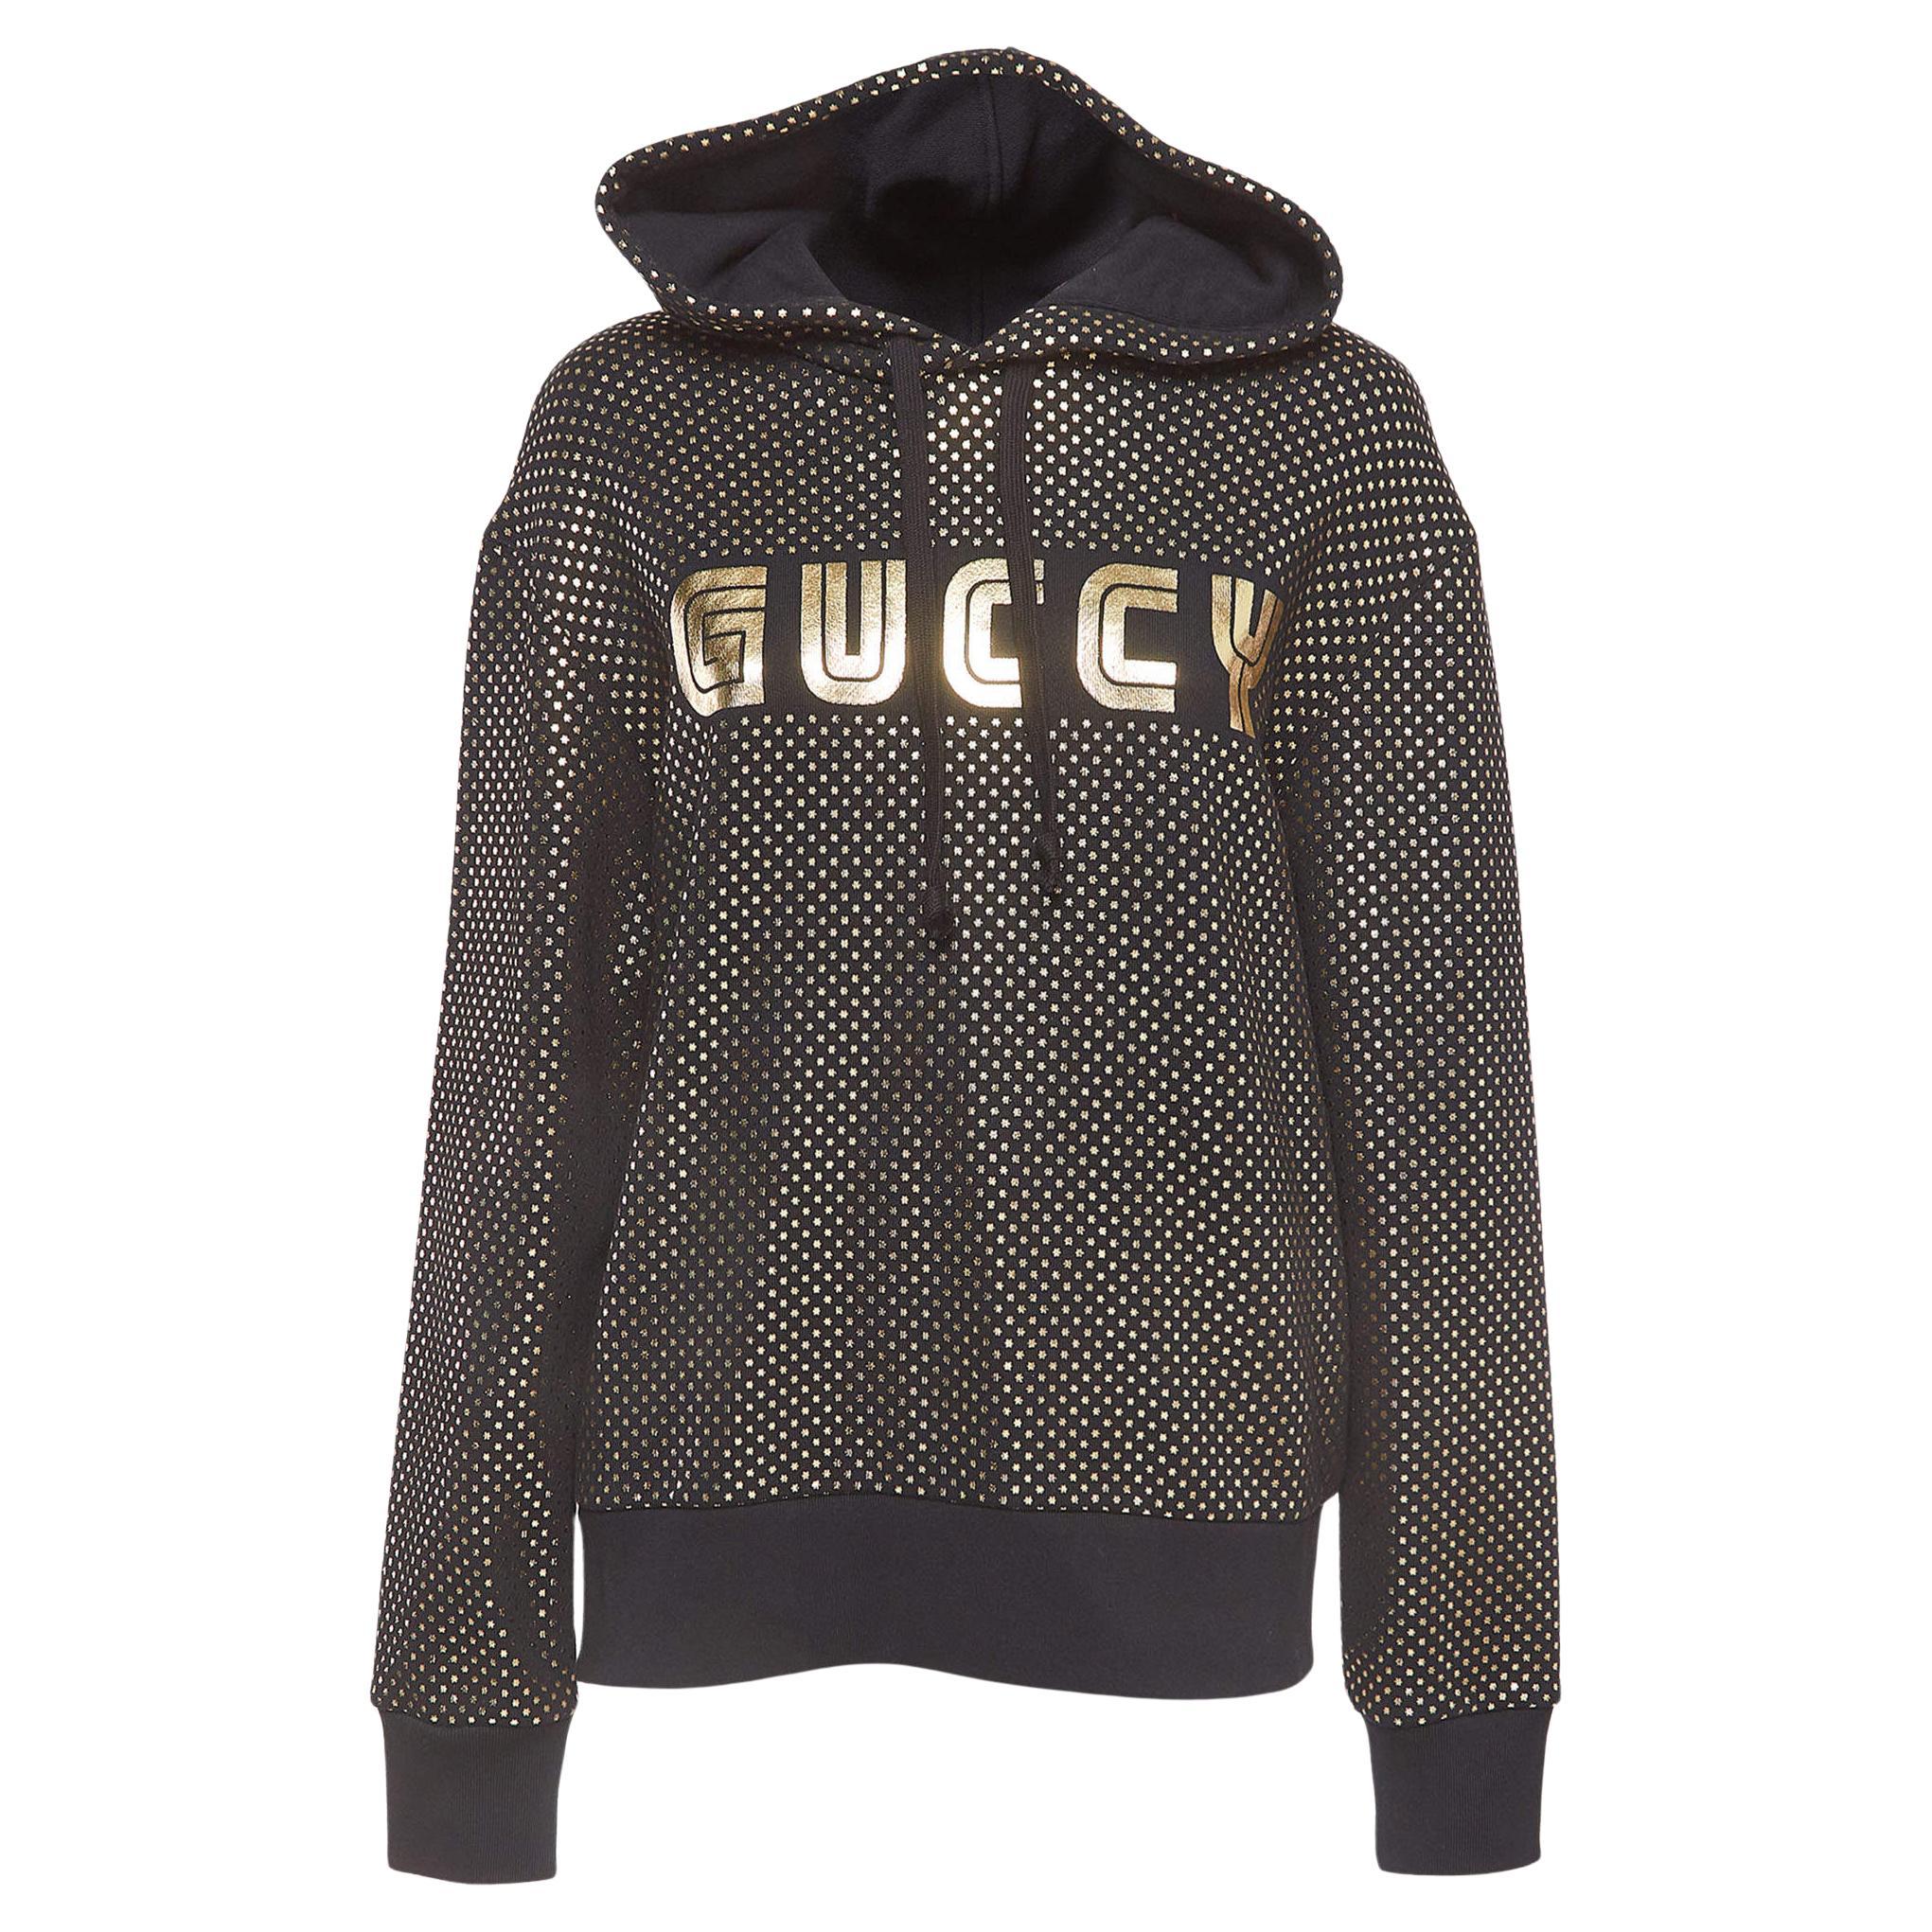 Gucci Black Black/Gold Star Printed Cotton Hoodie XS For Sale